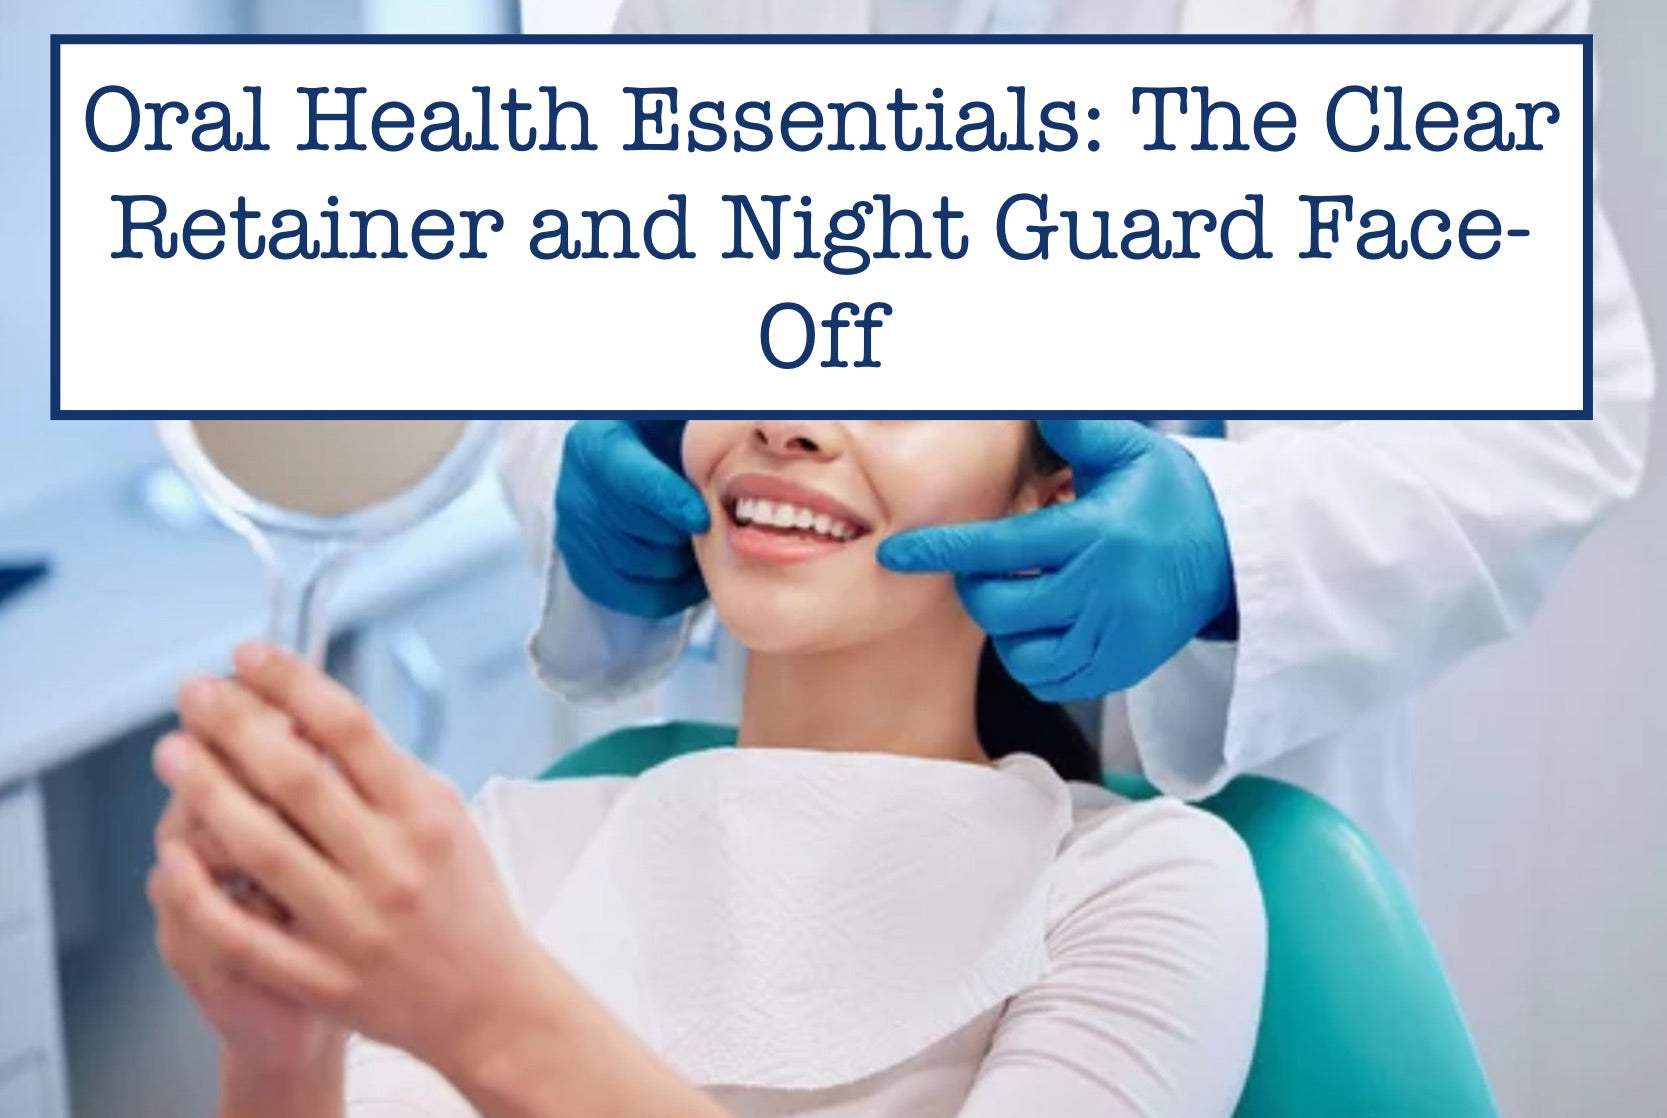 Oral Health Essentials: The Clear Retainer and Night Guard Face-Off